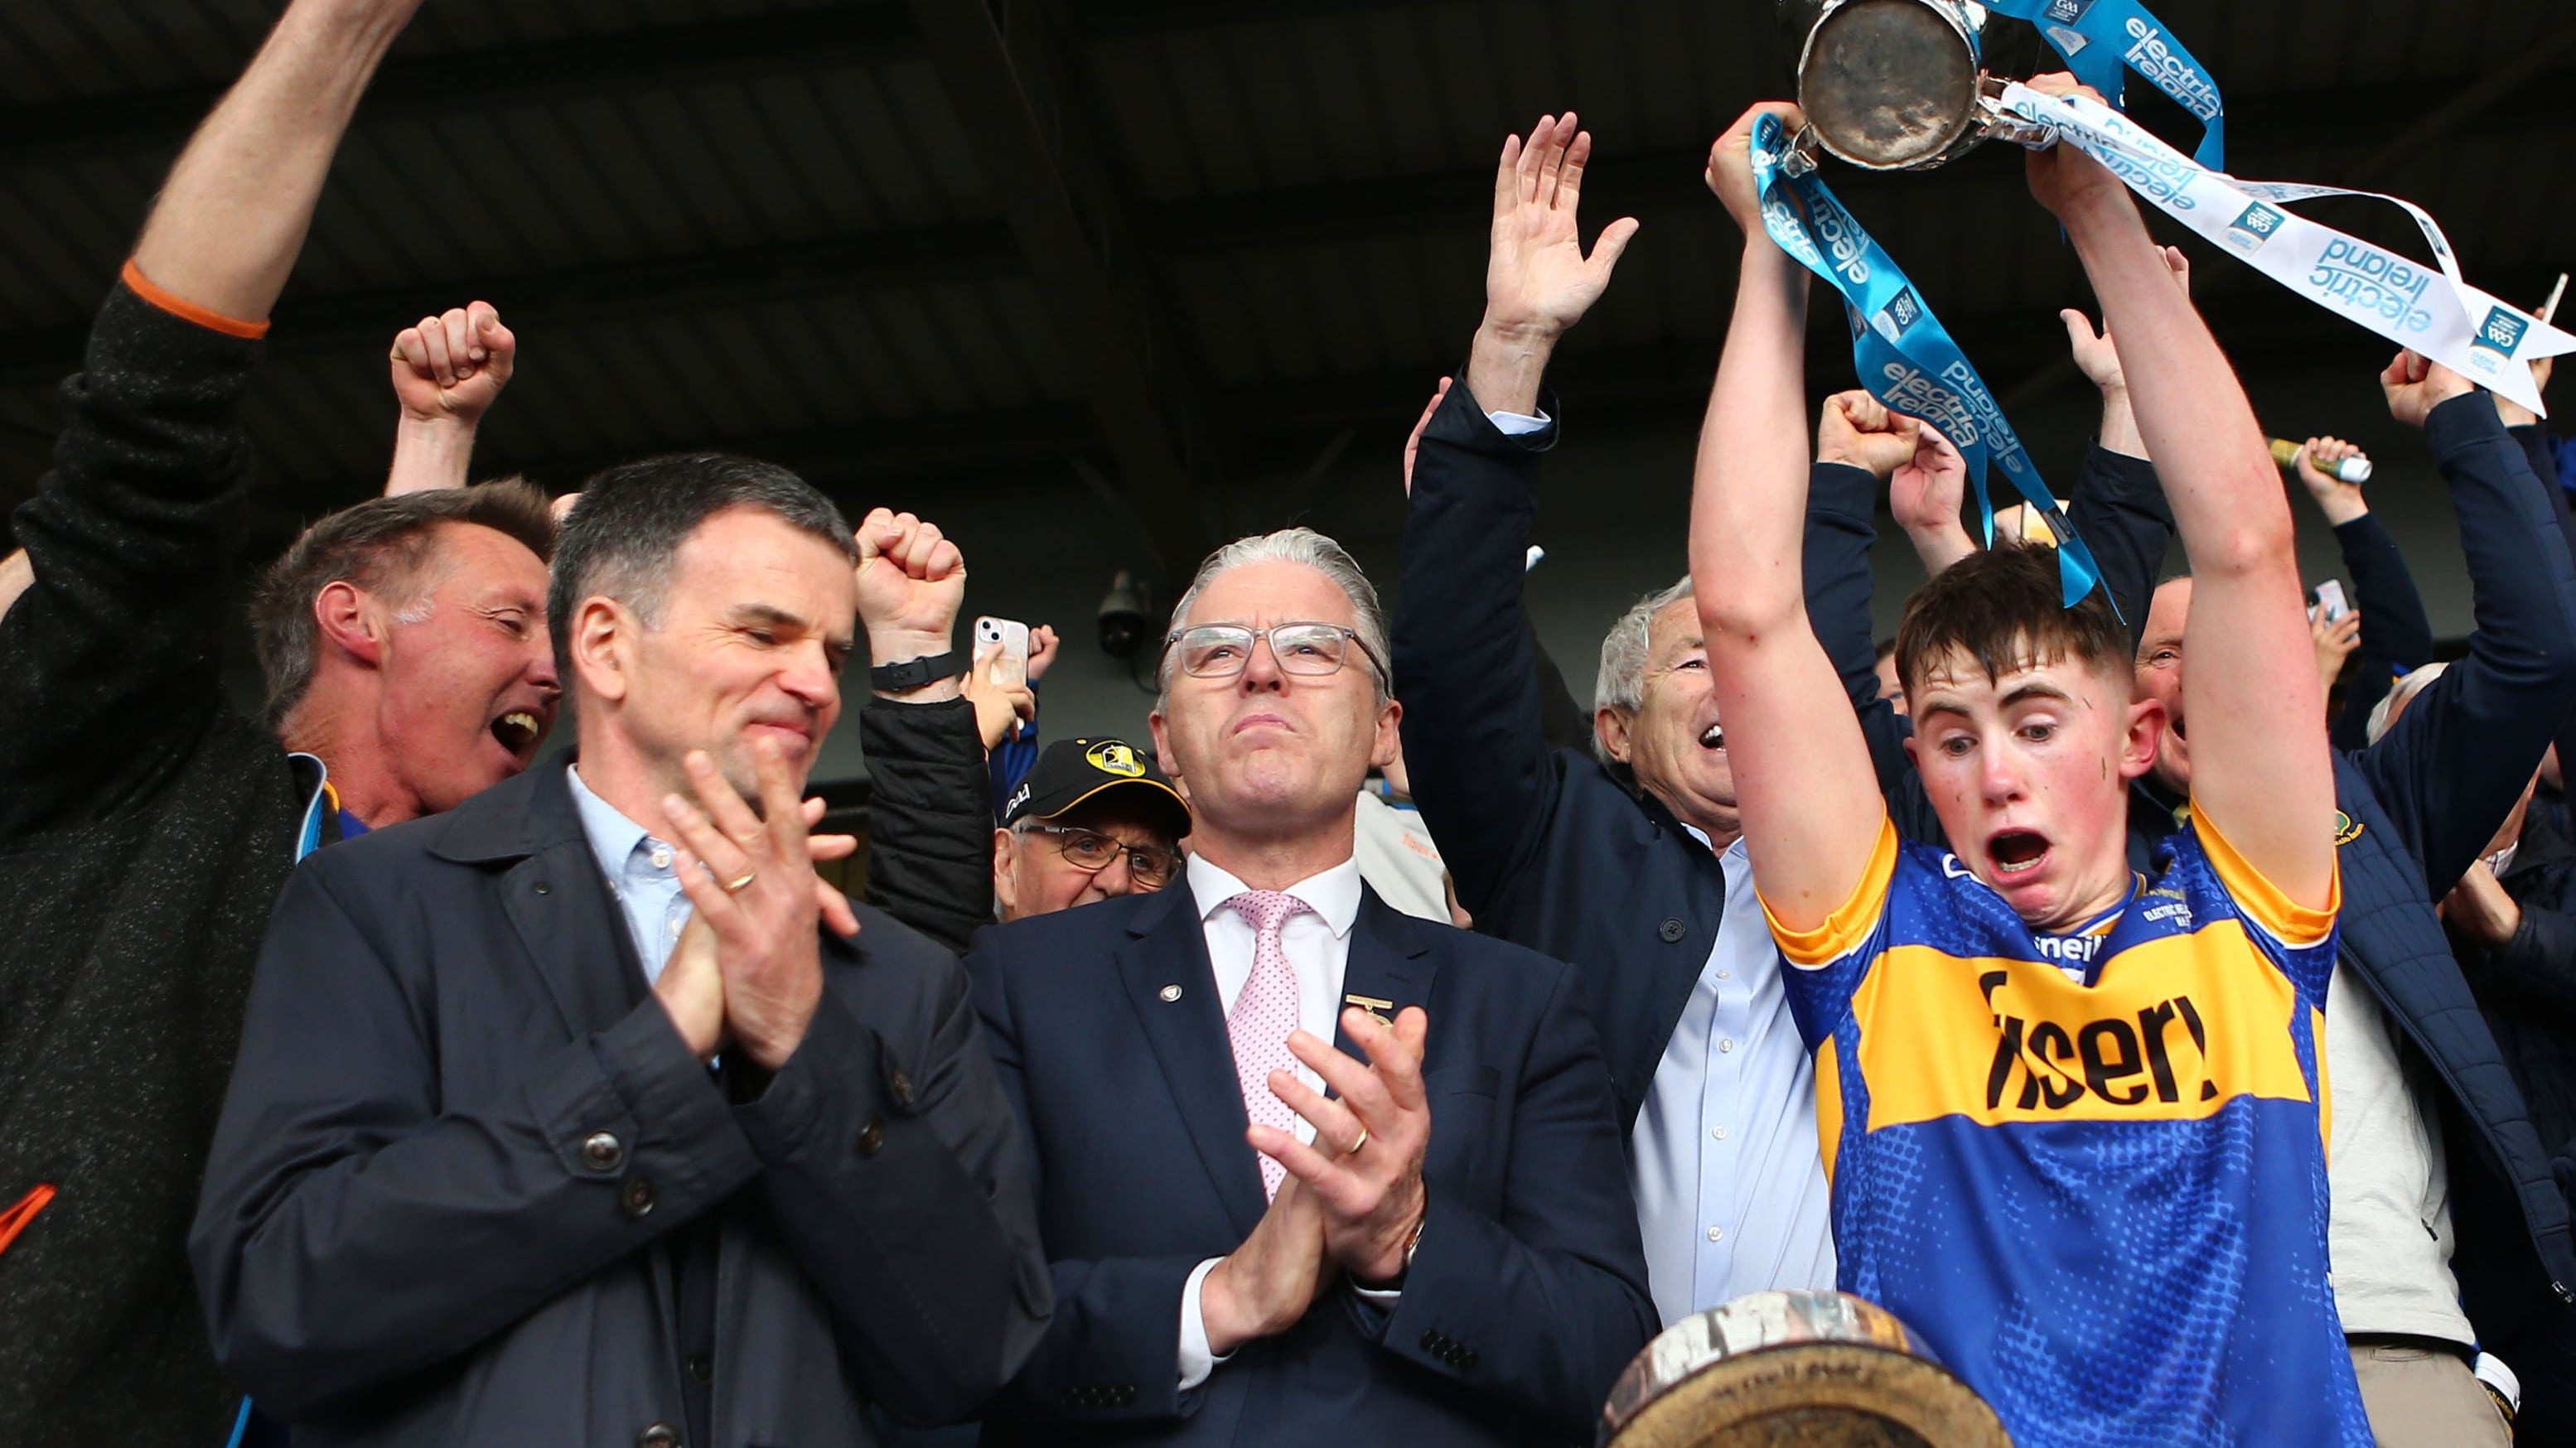 Electric Ireland All-Ireland Minor Hurling Championship Final, UPMC Nowlan Park, Co. Kilkenny 29/6/2024
Kilkenny vs Tipperary
Tipperary’s Cathal O’Reilly looks on as the base of the trophy detaches when he lifts it
Mandatory Credit ©INPHO/Ken Sutton